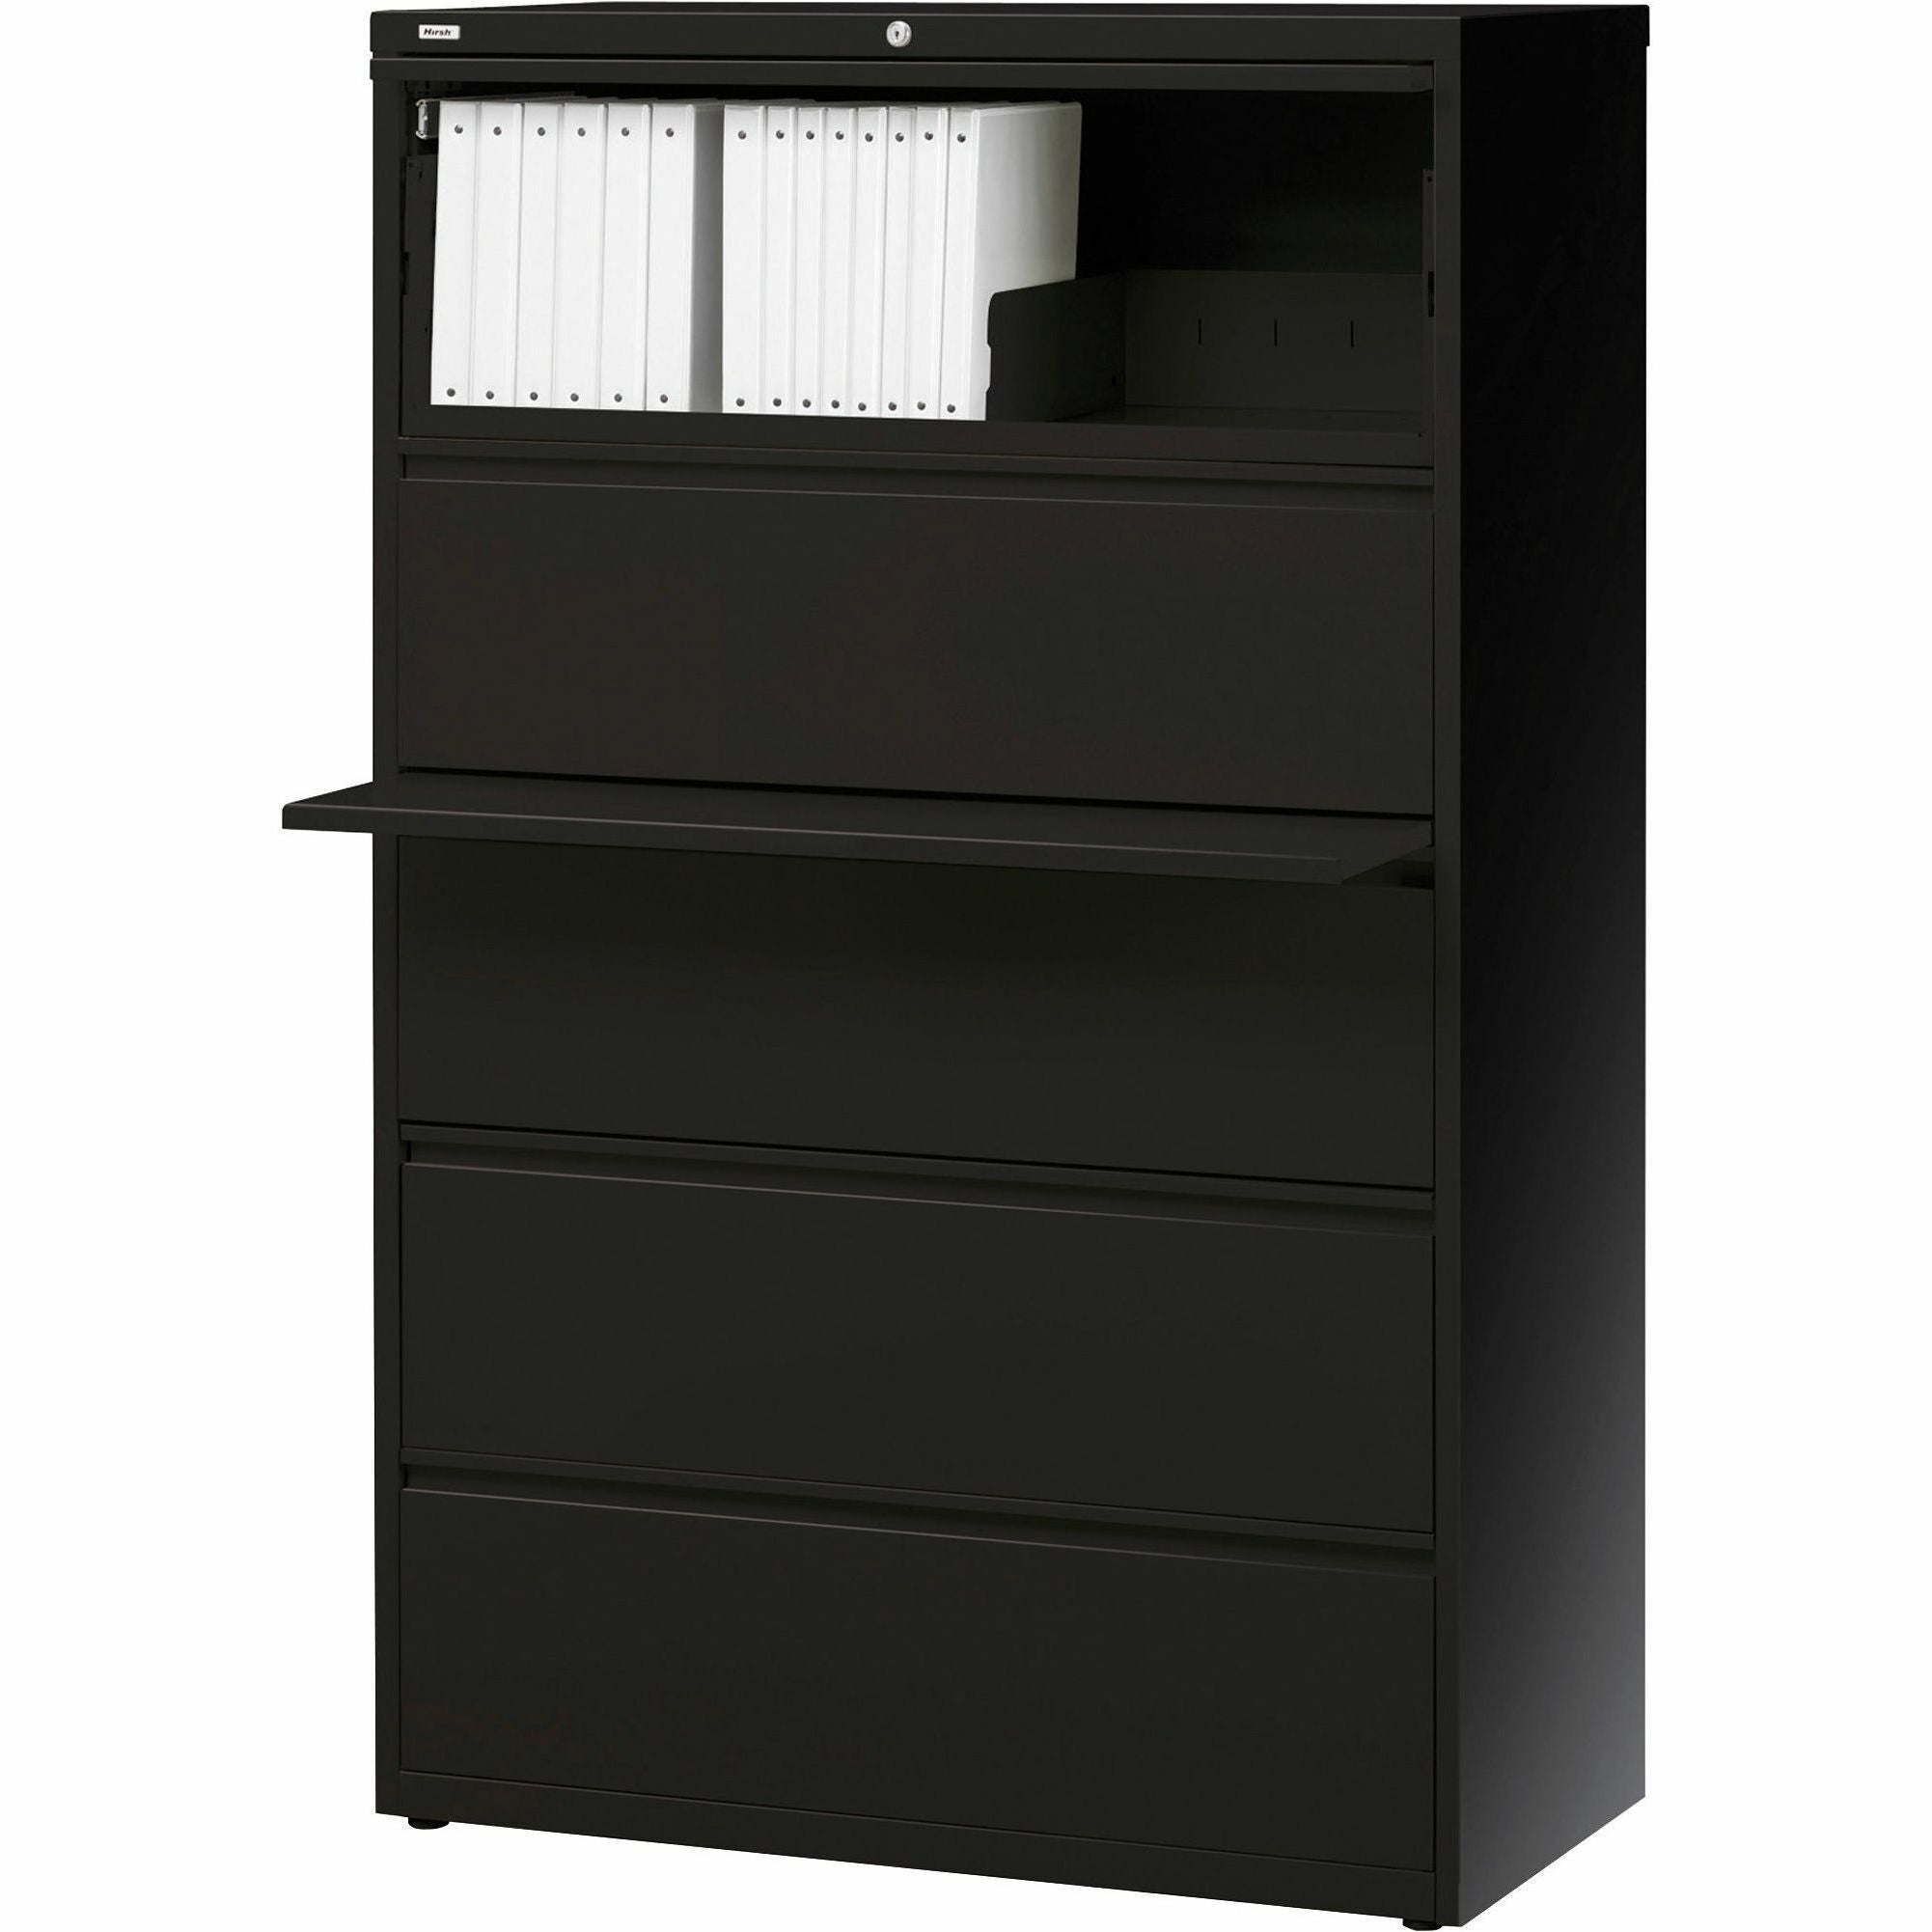 Lorell Fortress Series Lateral File w/Roll-out Posting Shelf - 42" x 18.6" x 67.7" - 5 x Drawer(s) for File - Letter, Legal, A4 - Lateral - Interlocking, Label Holder, Leveling Glide, Ball-bearing Suspension - Black - Recycled - 